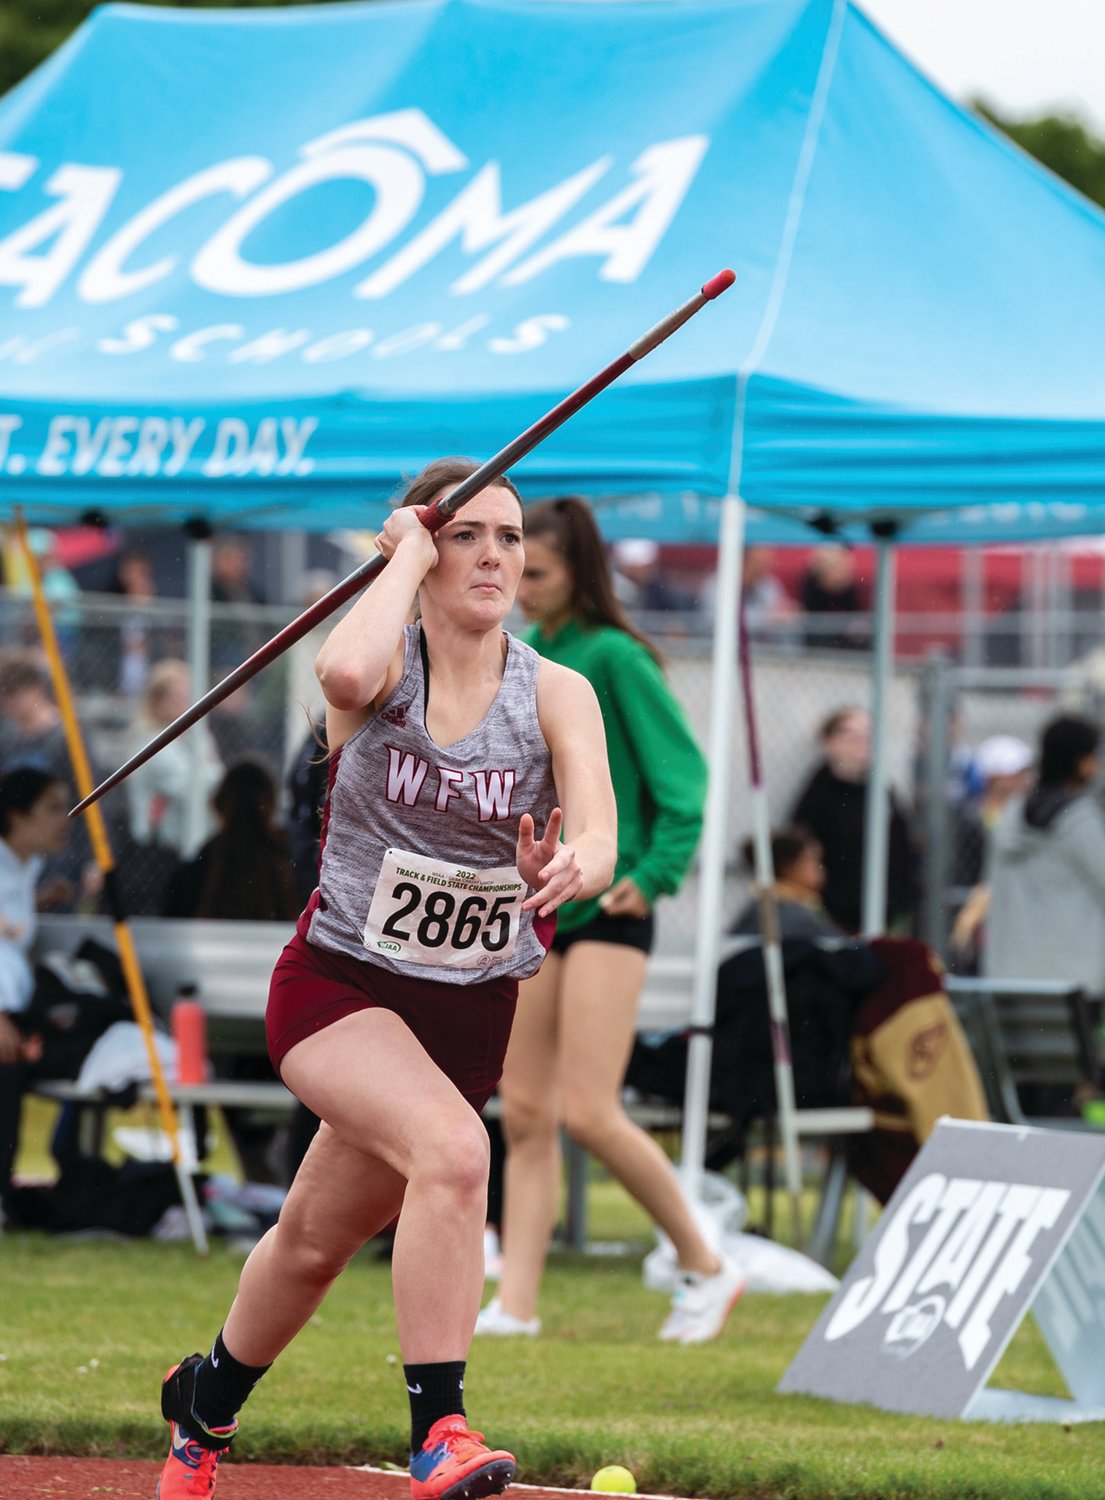 W.F. West's Kambriah Simper readies her run up on an attempt at the 2A Girls Javelin at the 2A/3A/4A State Track and Field Championships on Thursday, May 26, 2022, at Mount Tahoma High School in Tacoma. (Joshua Hart/For The Chronicle)